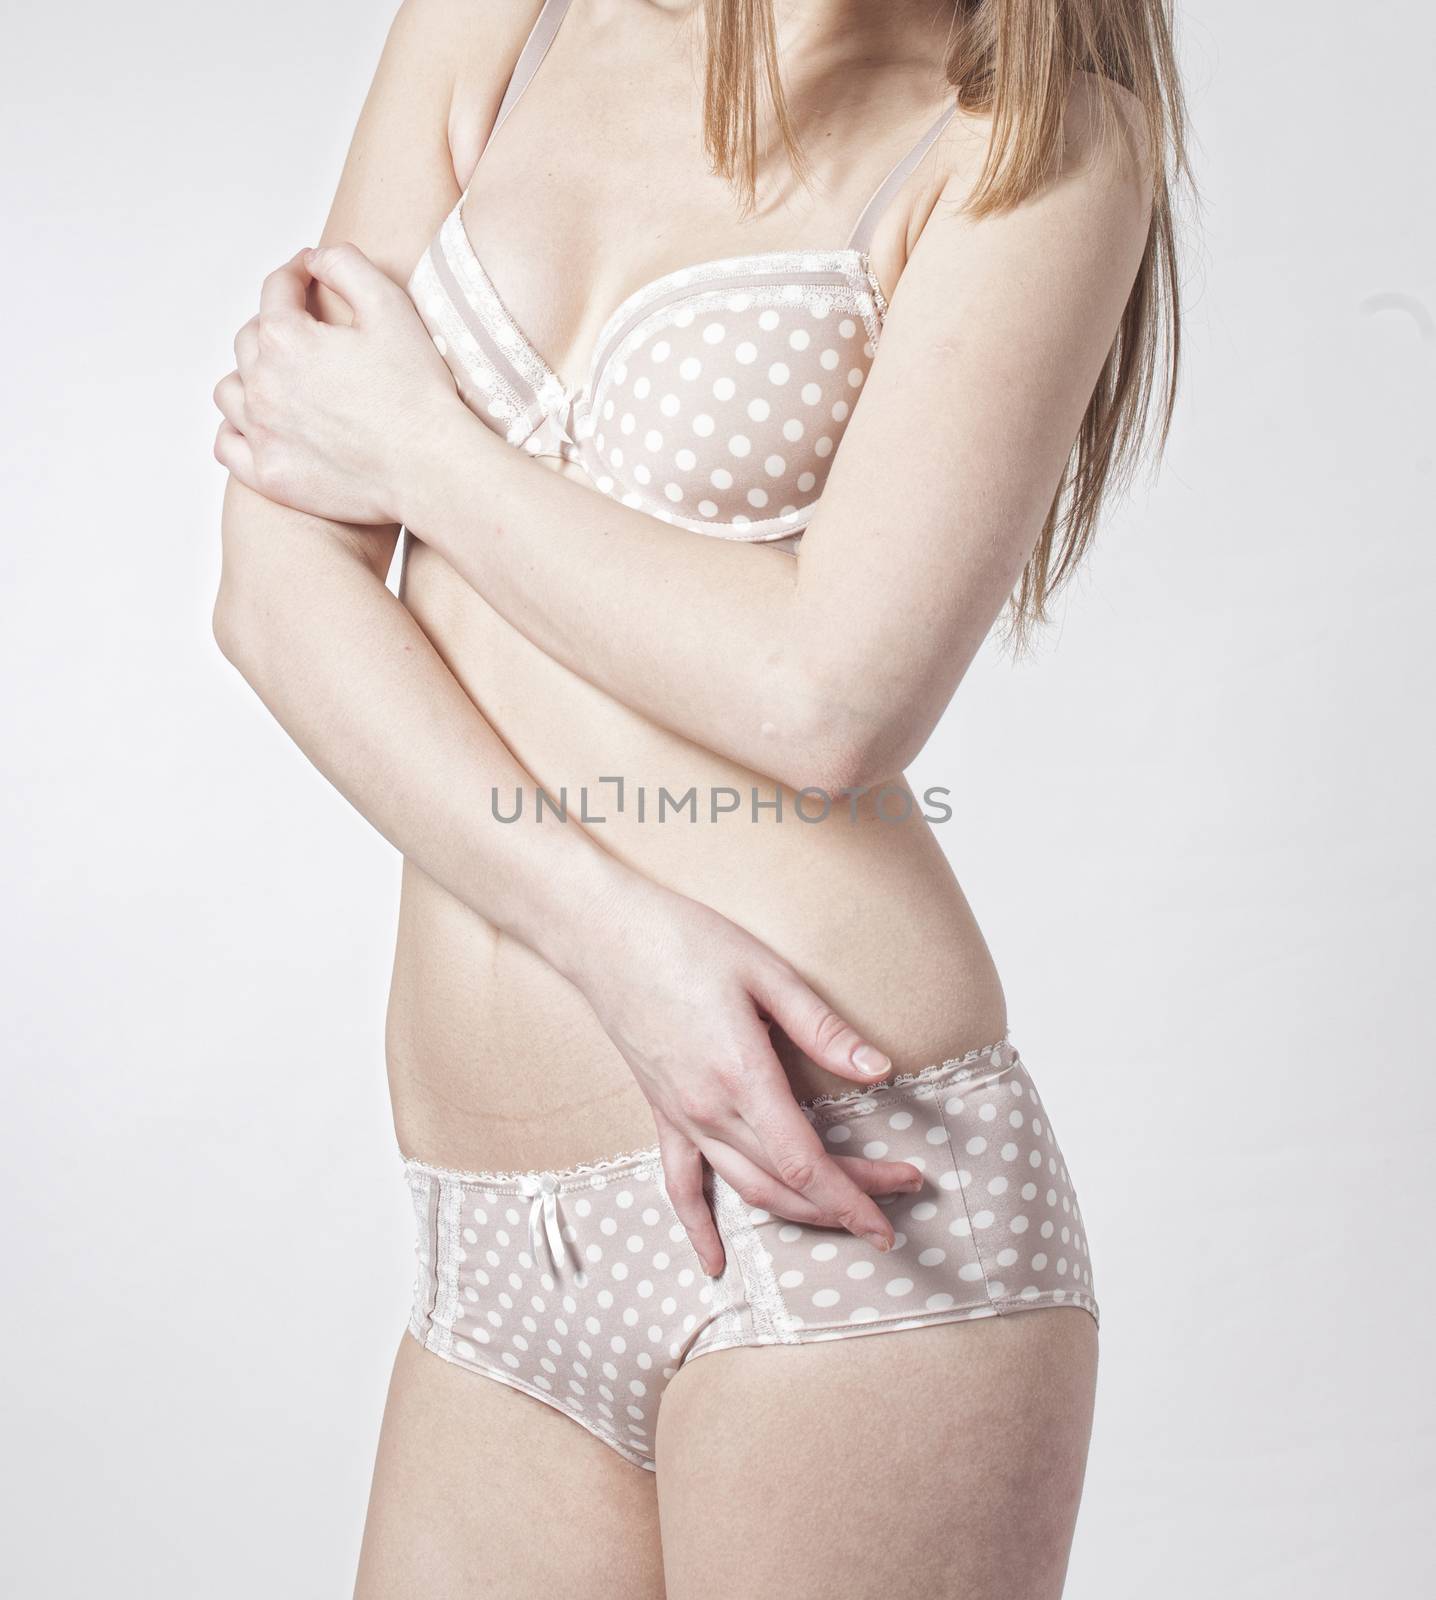 series of photos beautiful young girl different underwear